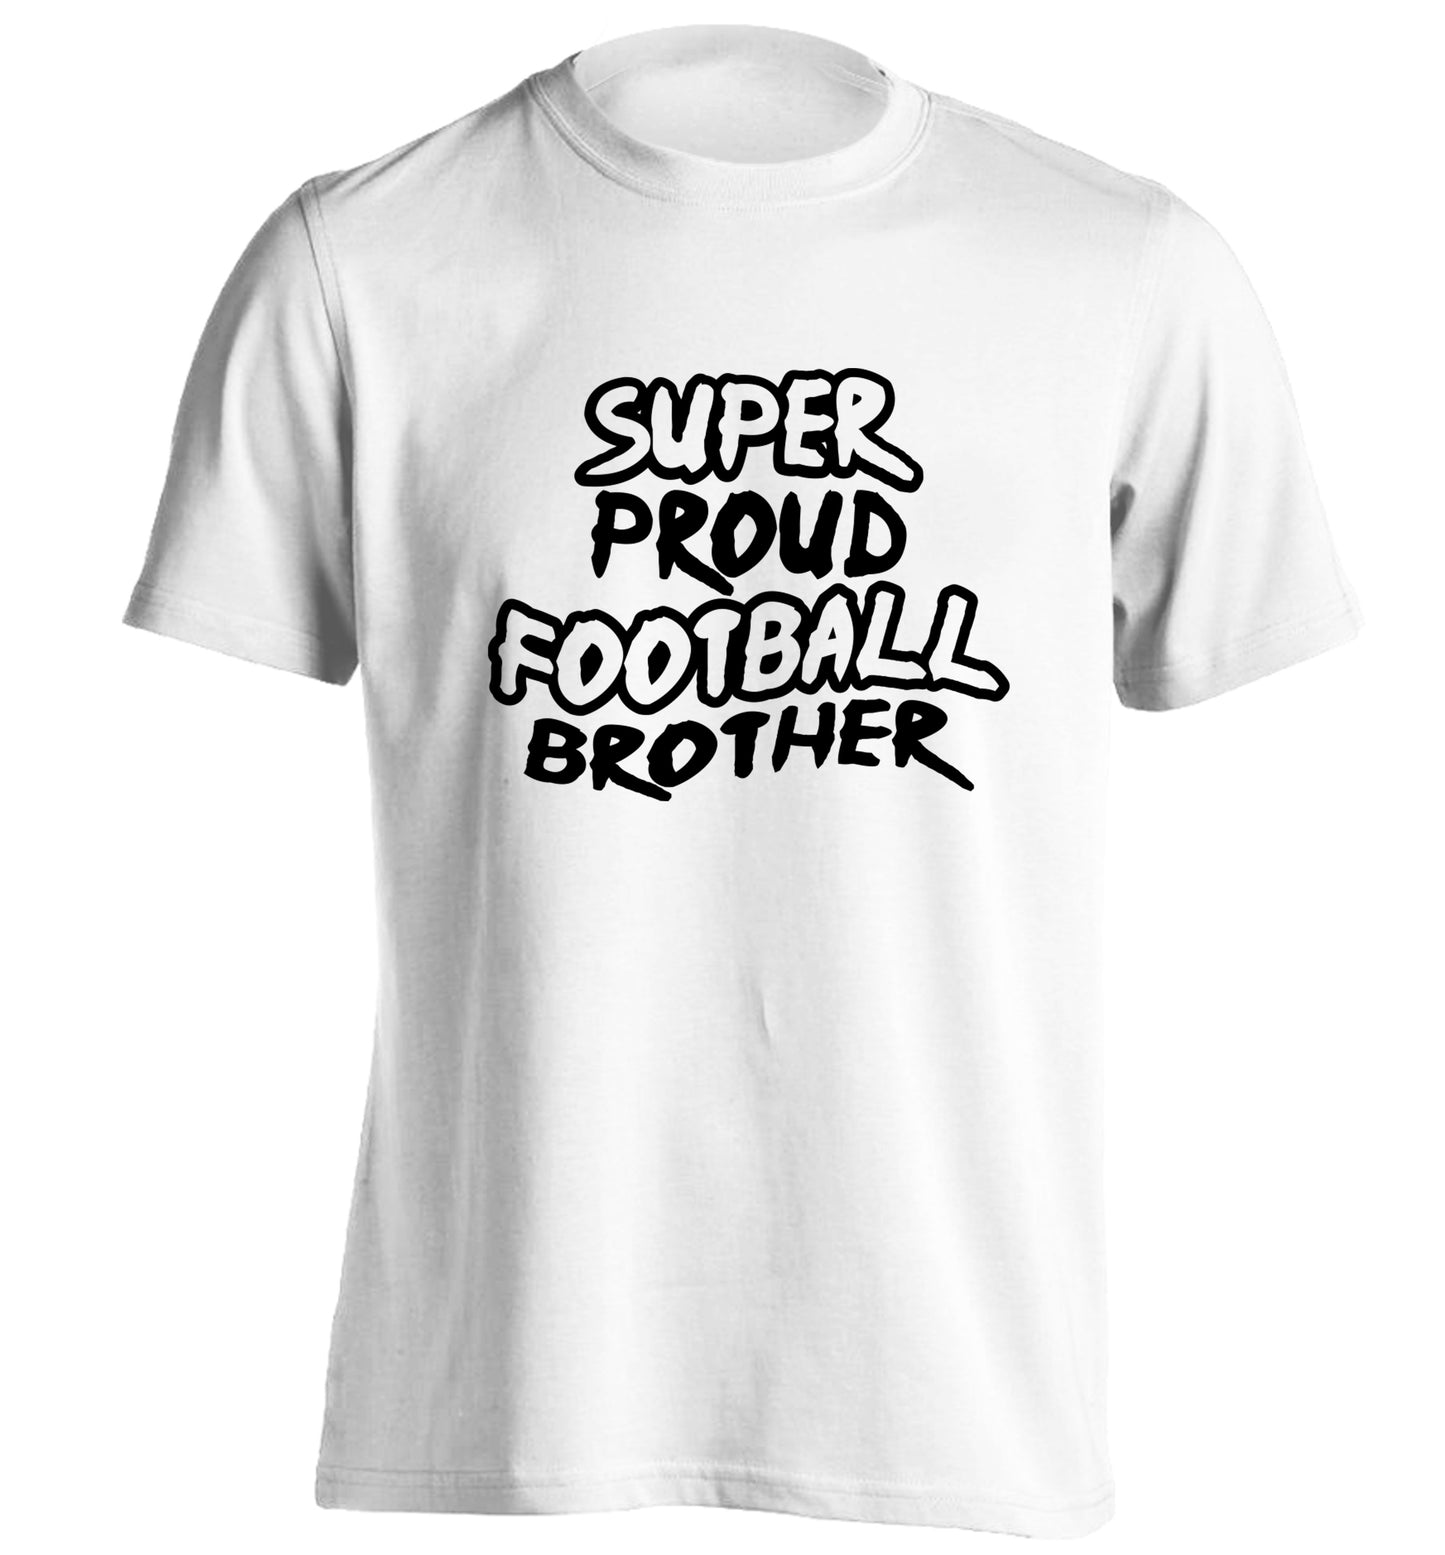 Super proud football brother adults unisexwhite Tshirt 2XL